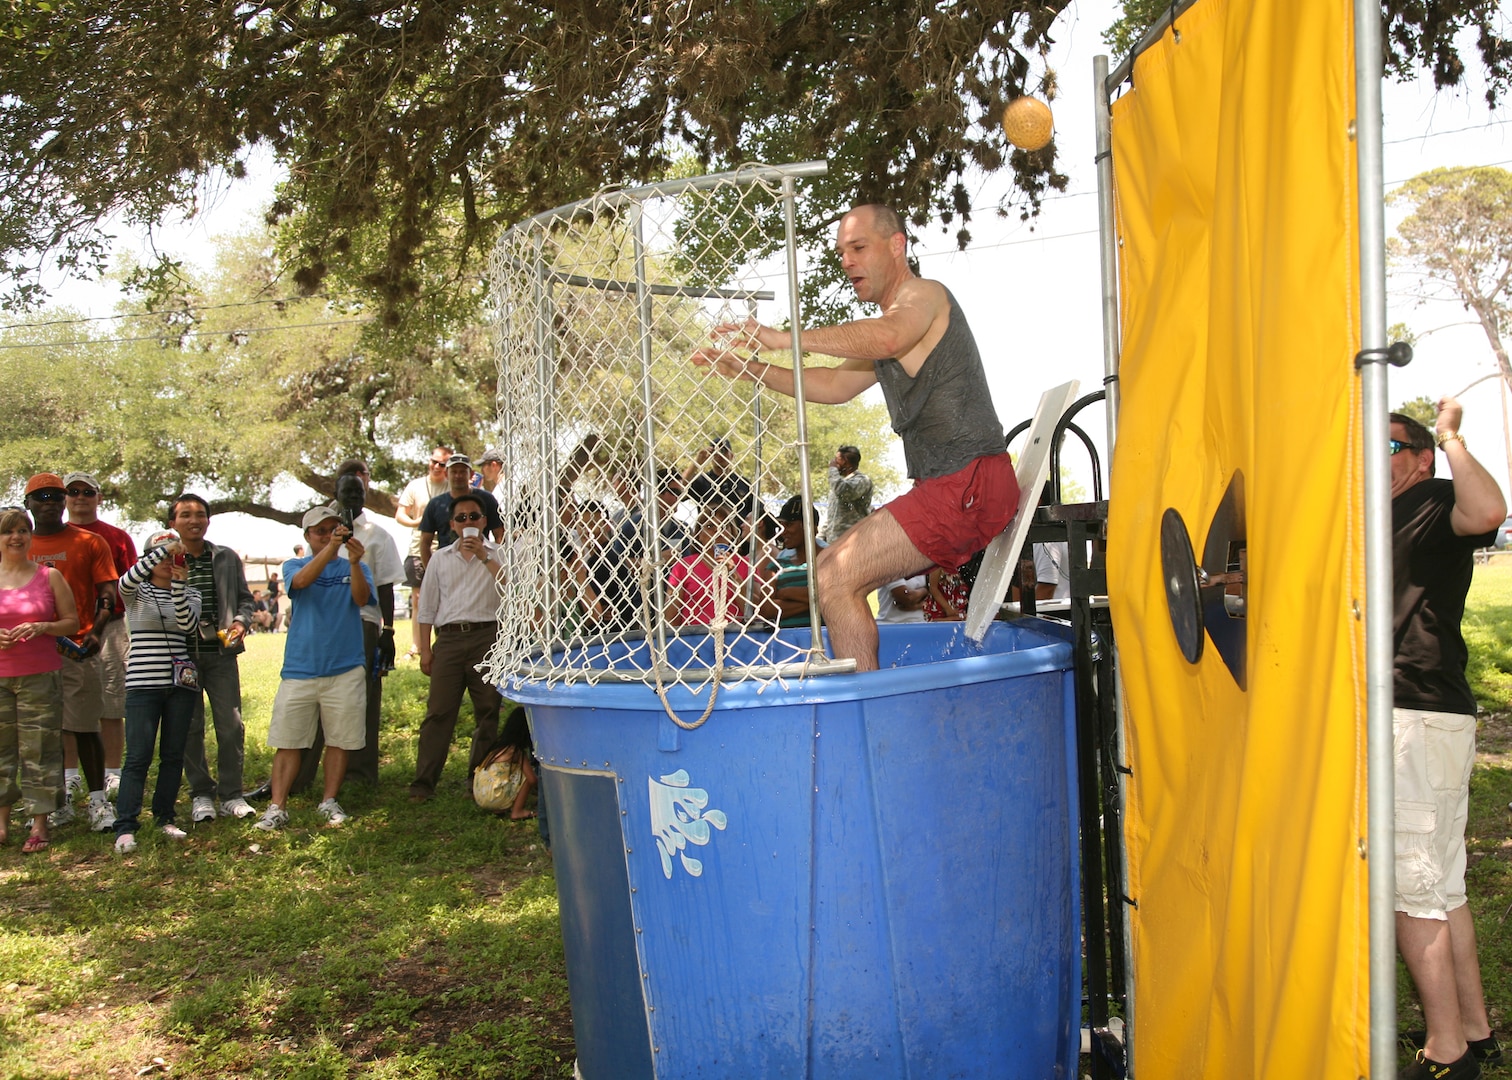 Col. Howard Jones III, Defense Language Institute English Learning Center commandant, takes a plunge in the dunking booth May 7 at the annual DLIELC picnic. Colonel Jones is responsible for providing on-campus English language training to military and civilian leaders from over 110 countries, and overseeing English language training at 30 overseas nonresident locations around the world. (U.S. Air Force photo/Robbin Cresswell)